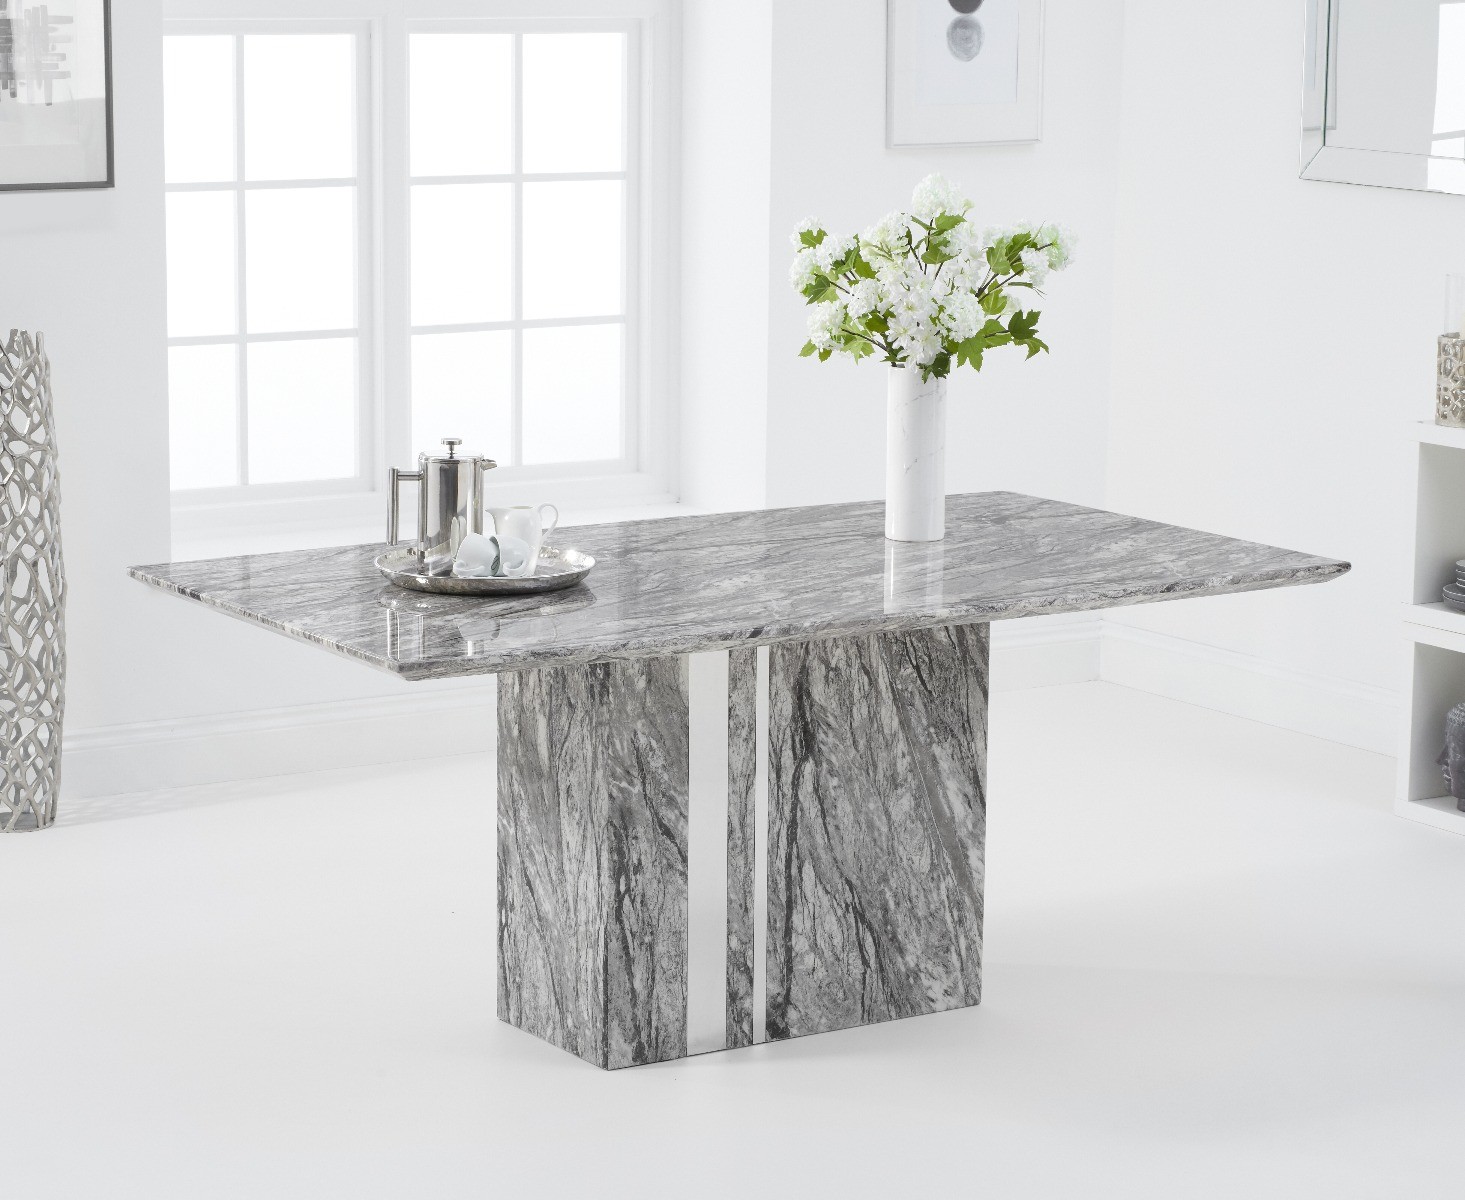 Photo 2 of Alicia 180cm grey marble dining table with 4 black aldo chairs